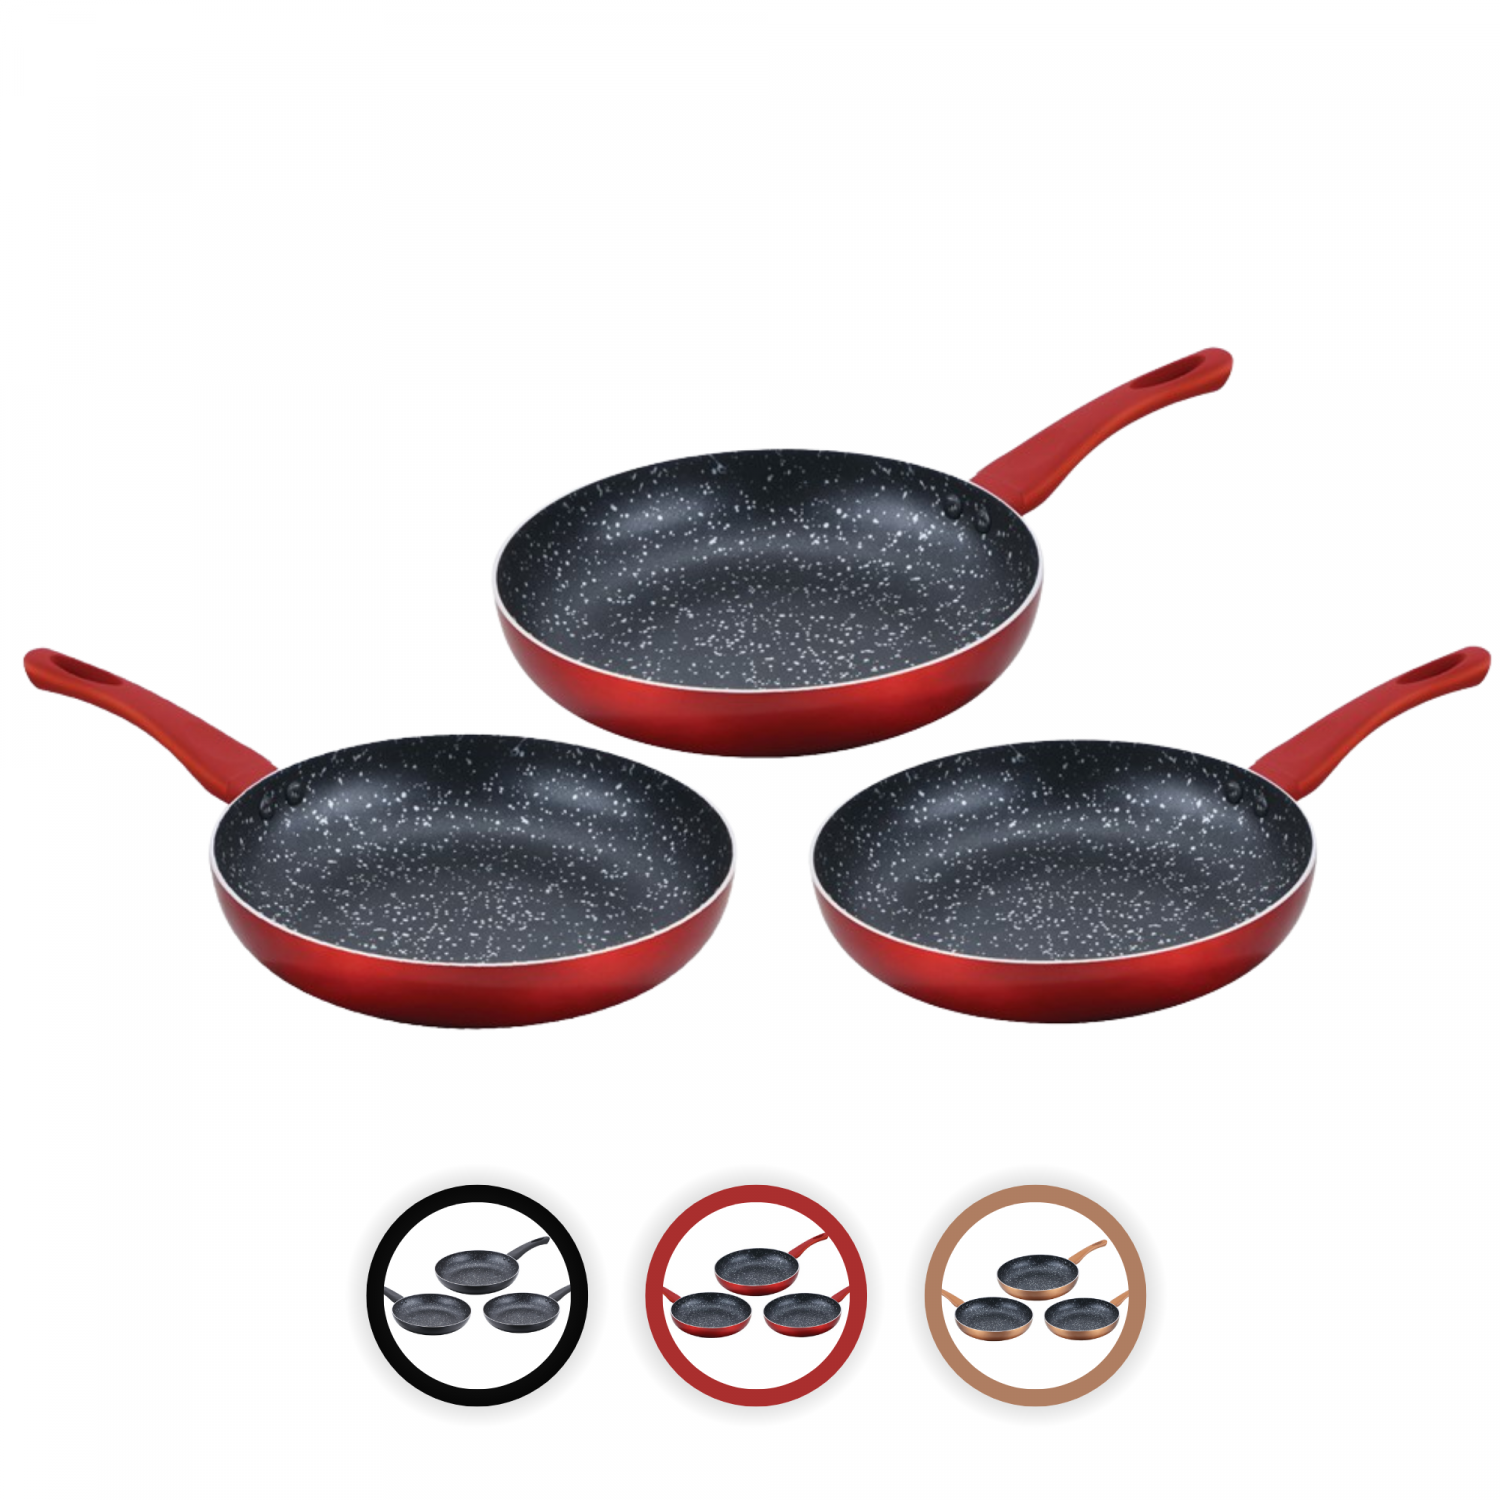 Cenocco Set of 3 Frying Pans with Marble Coating